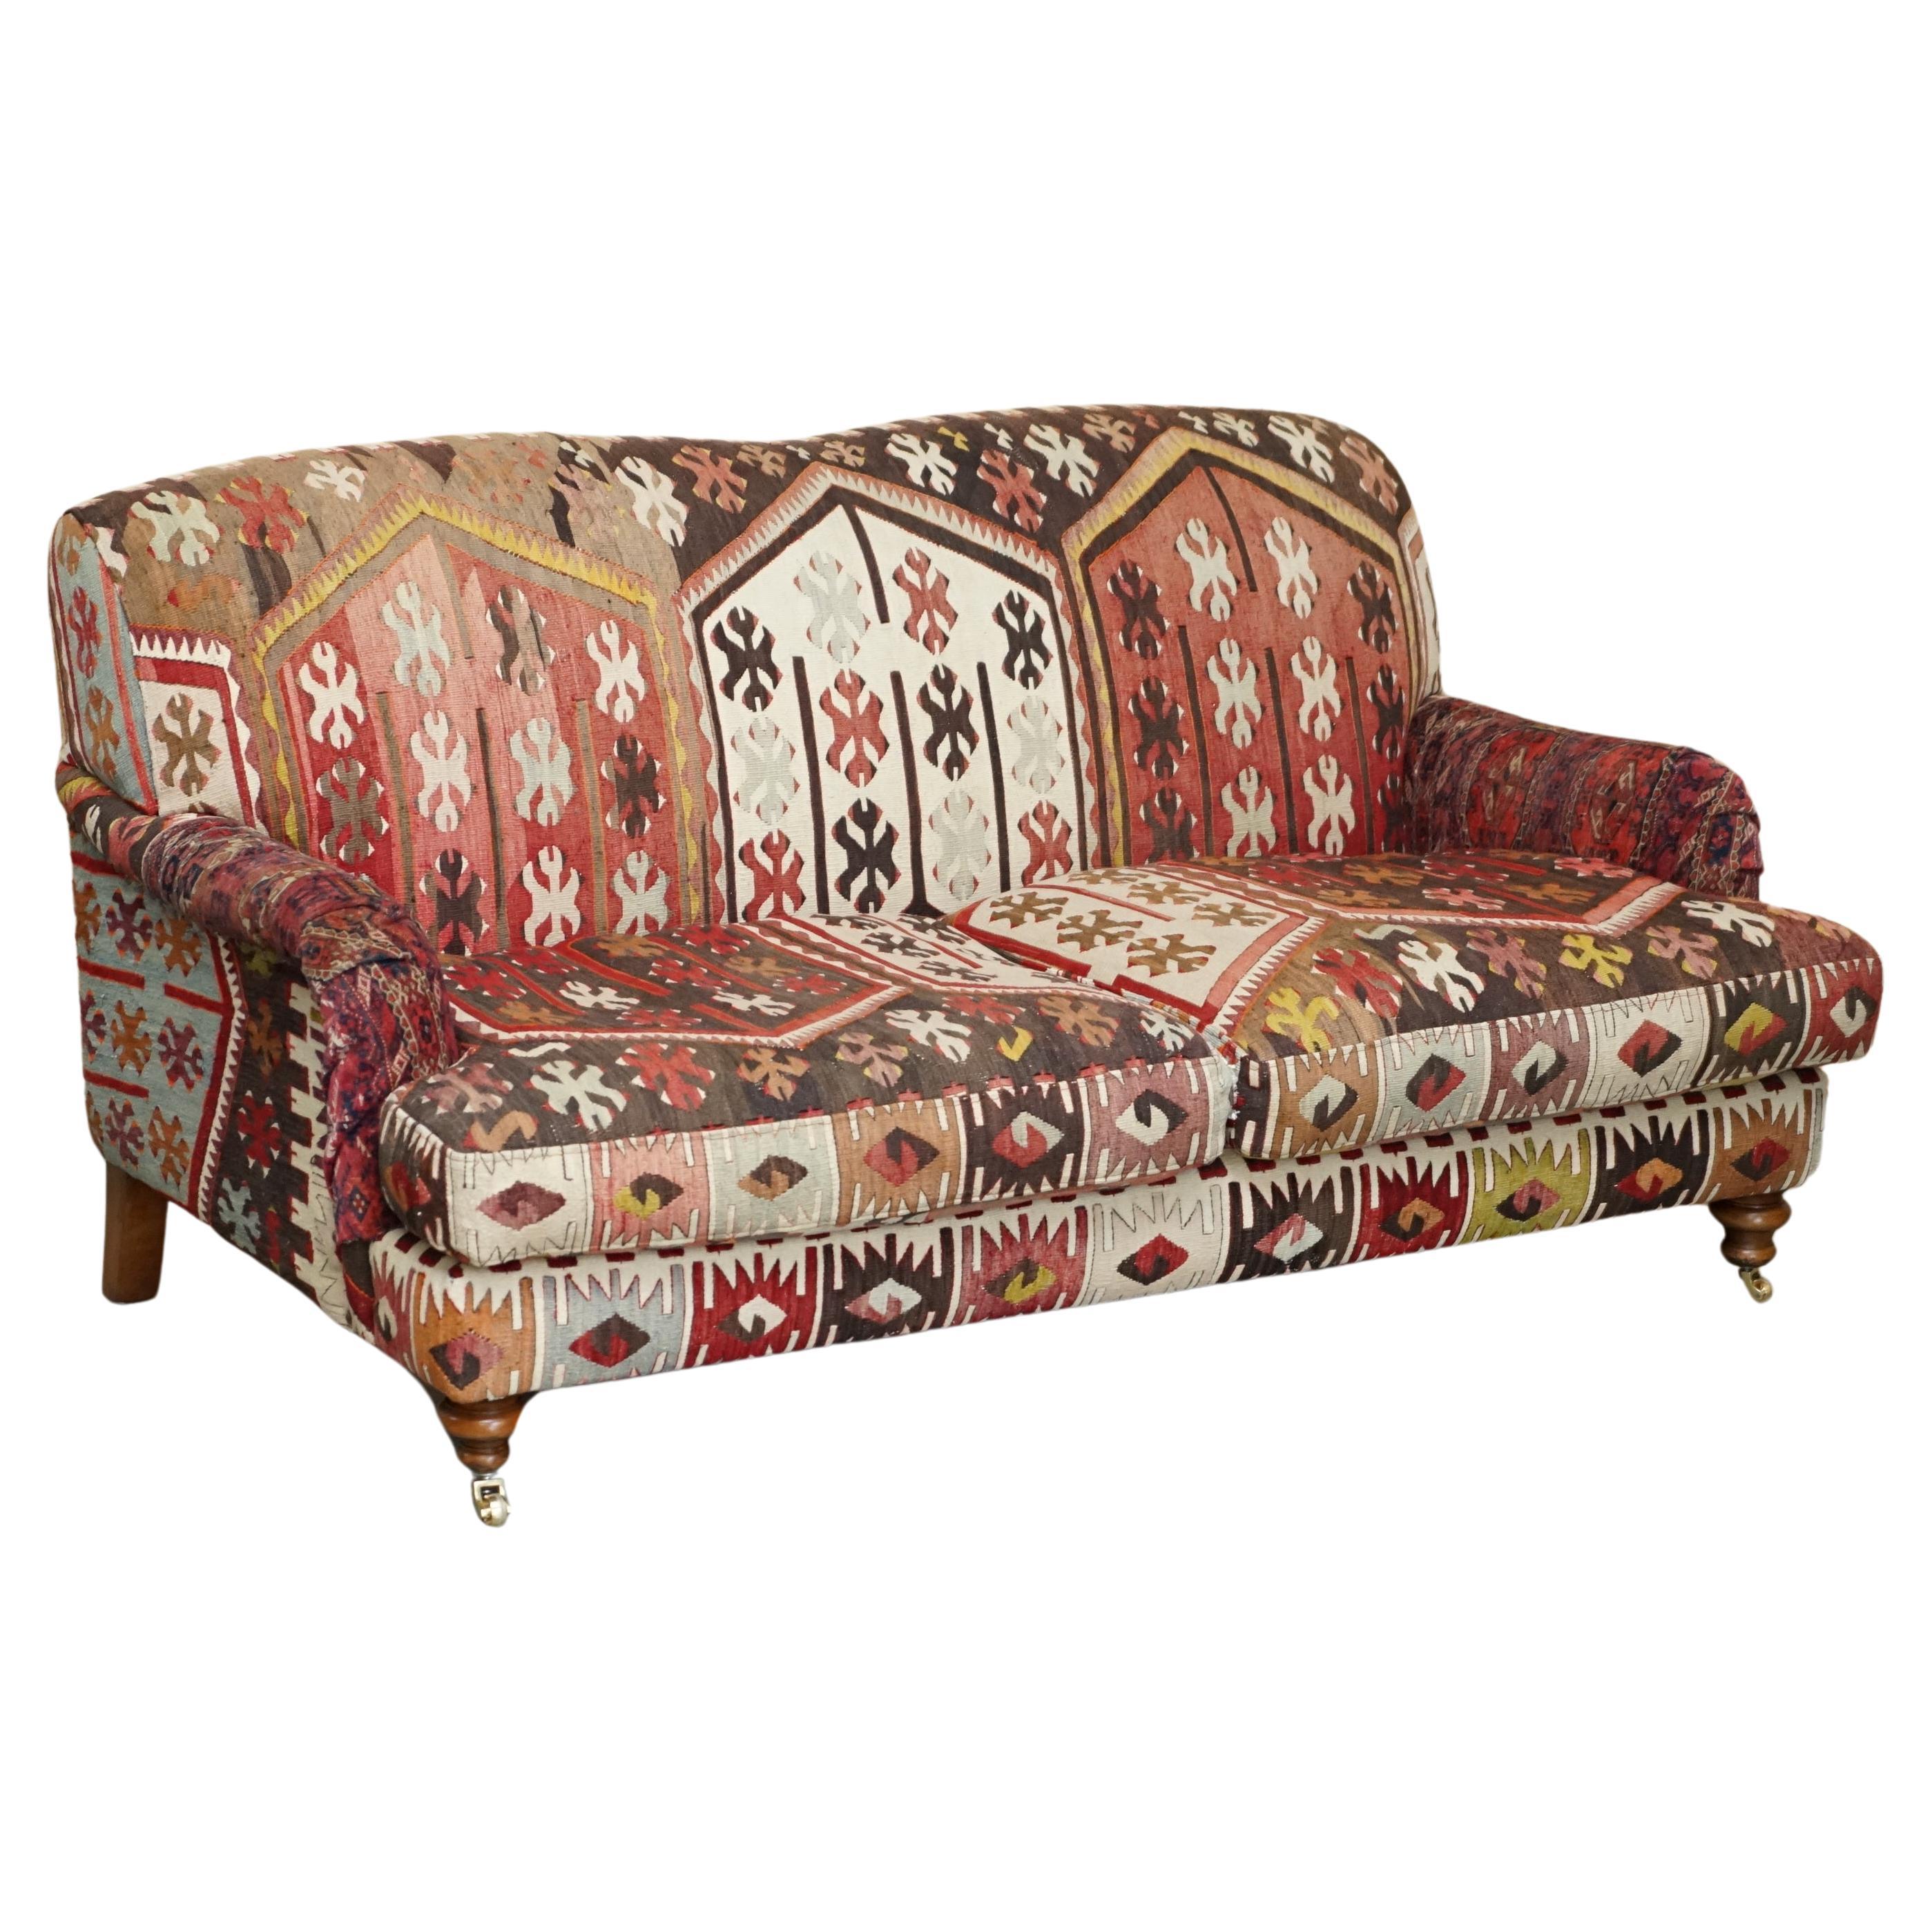 FINE ViNTAGE GEORGE SMITH HOWARD & SON'S STYLE KILIM UPHOLSTERED TWO SEATER SOFA